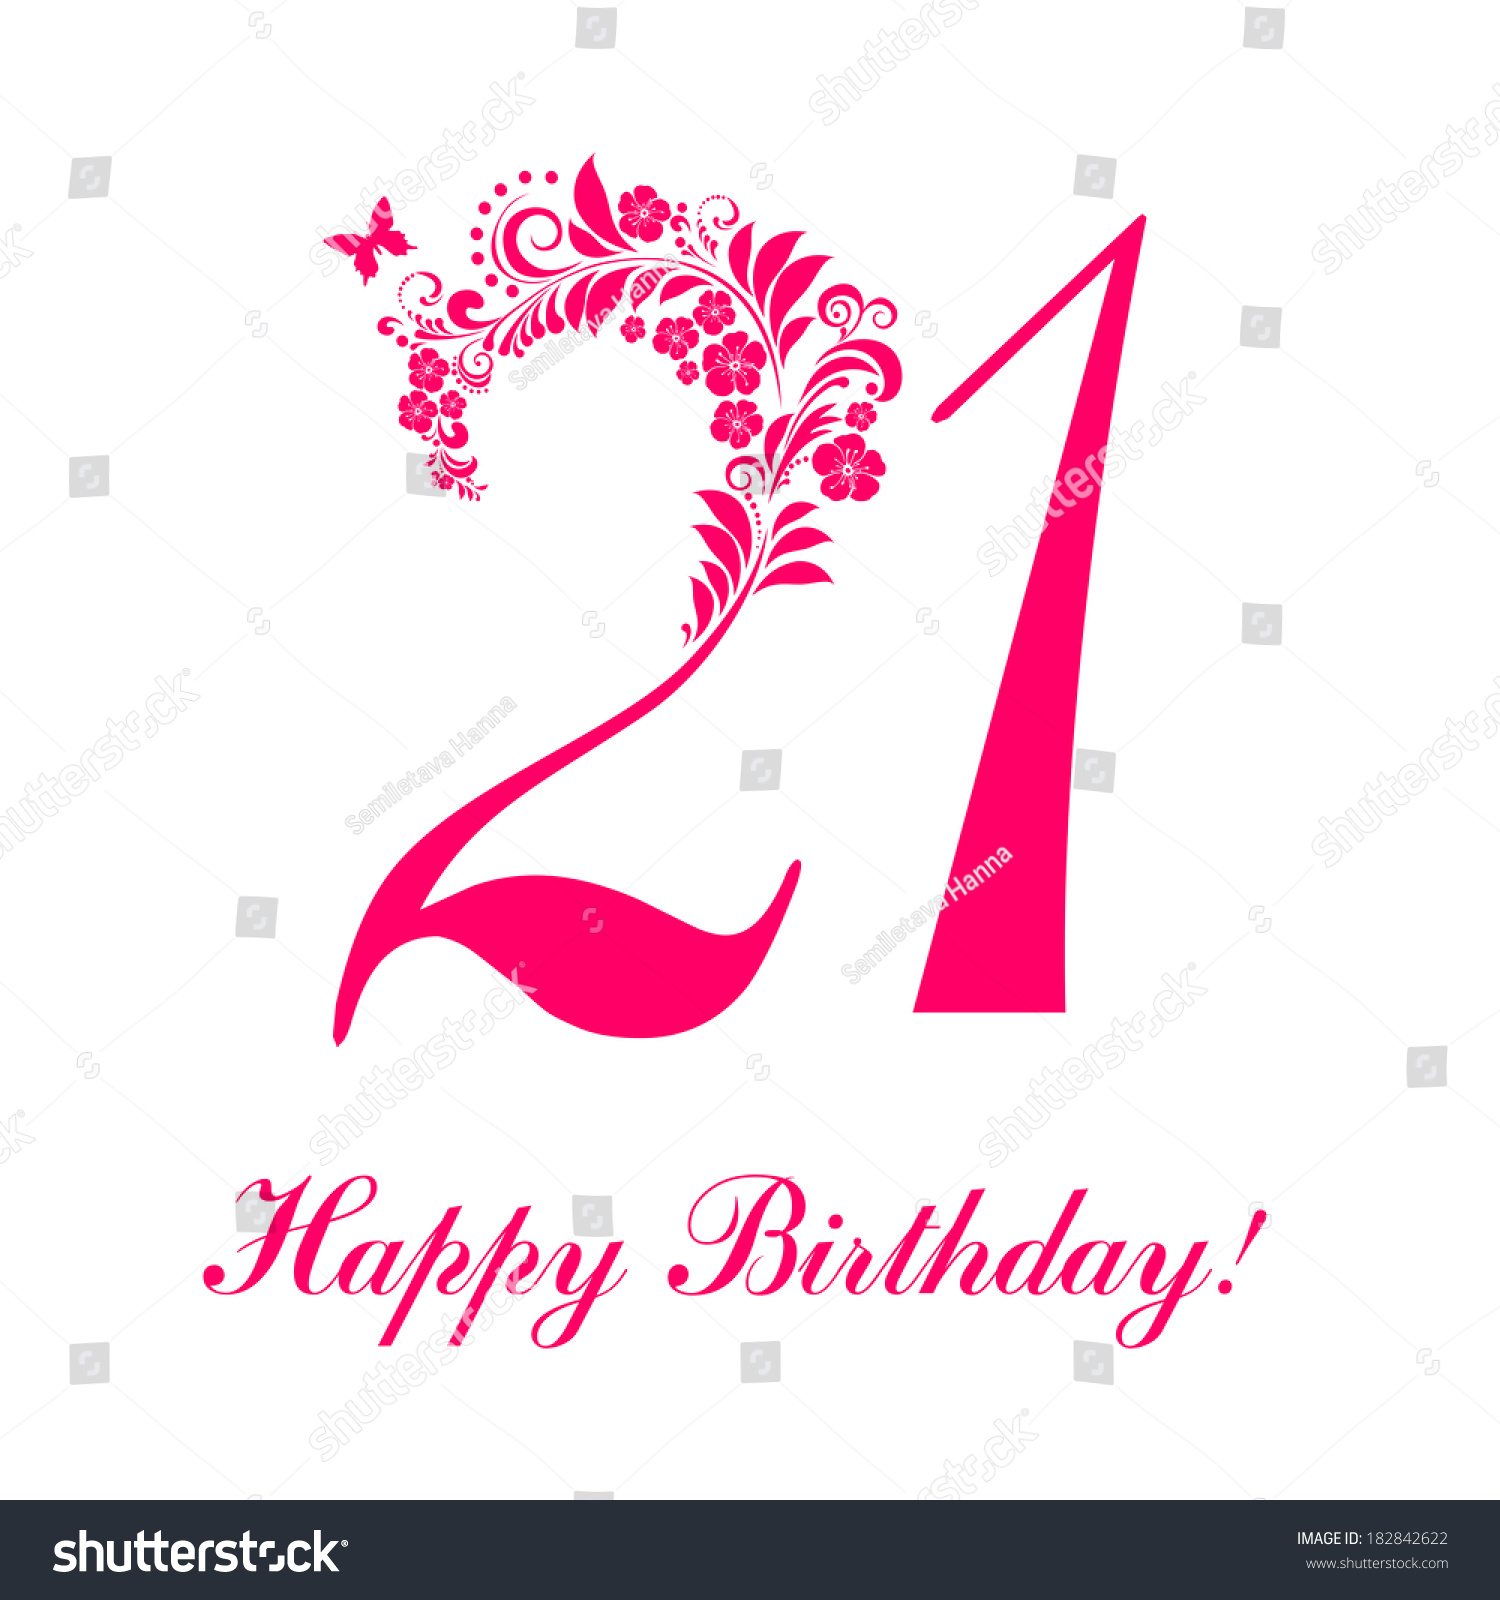 Happy Birthday Card Celebration Background Number Stock Vector ...